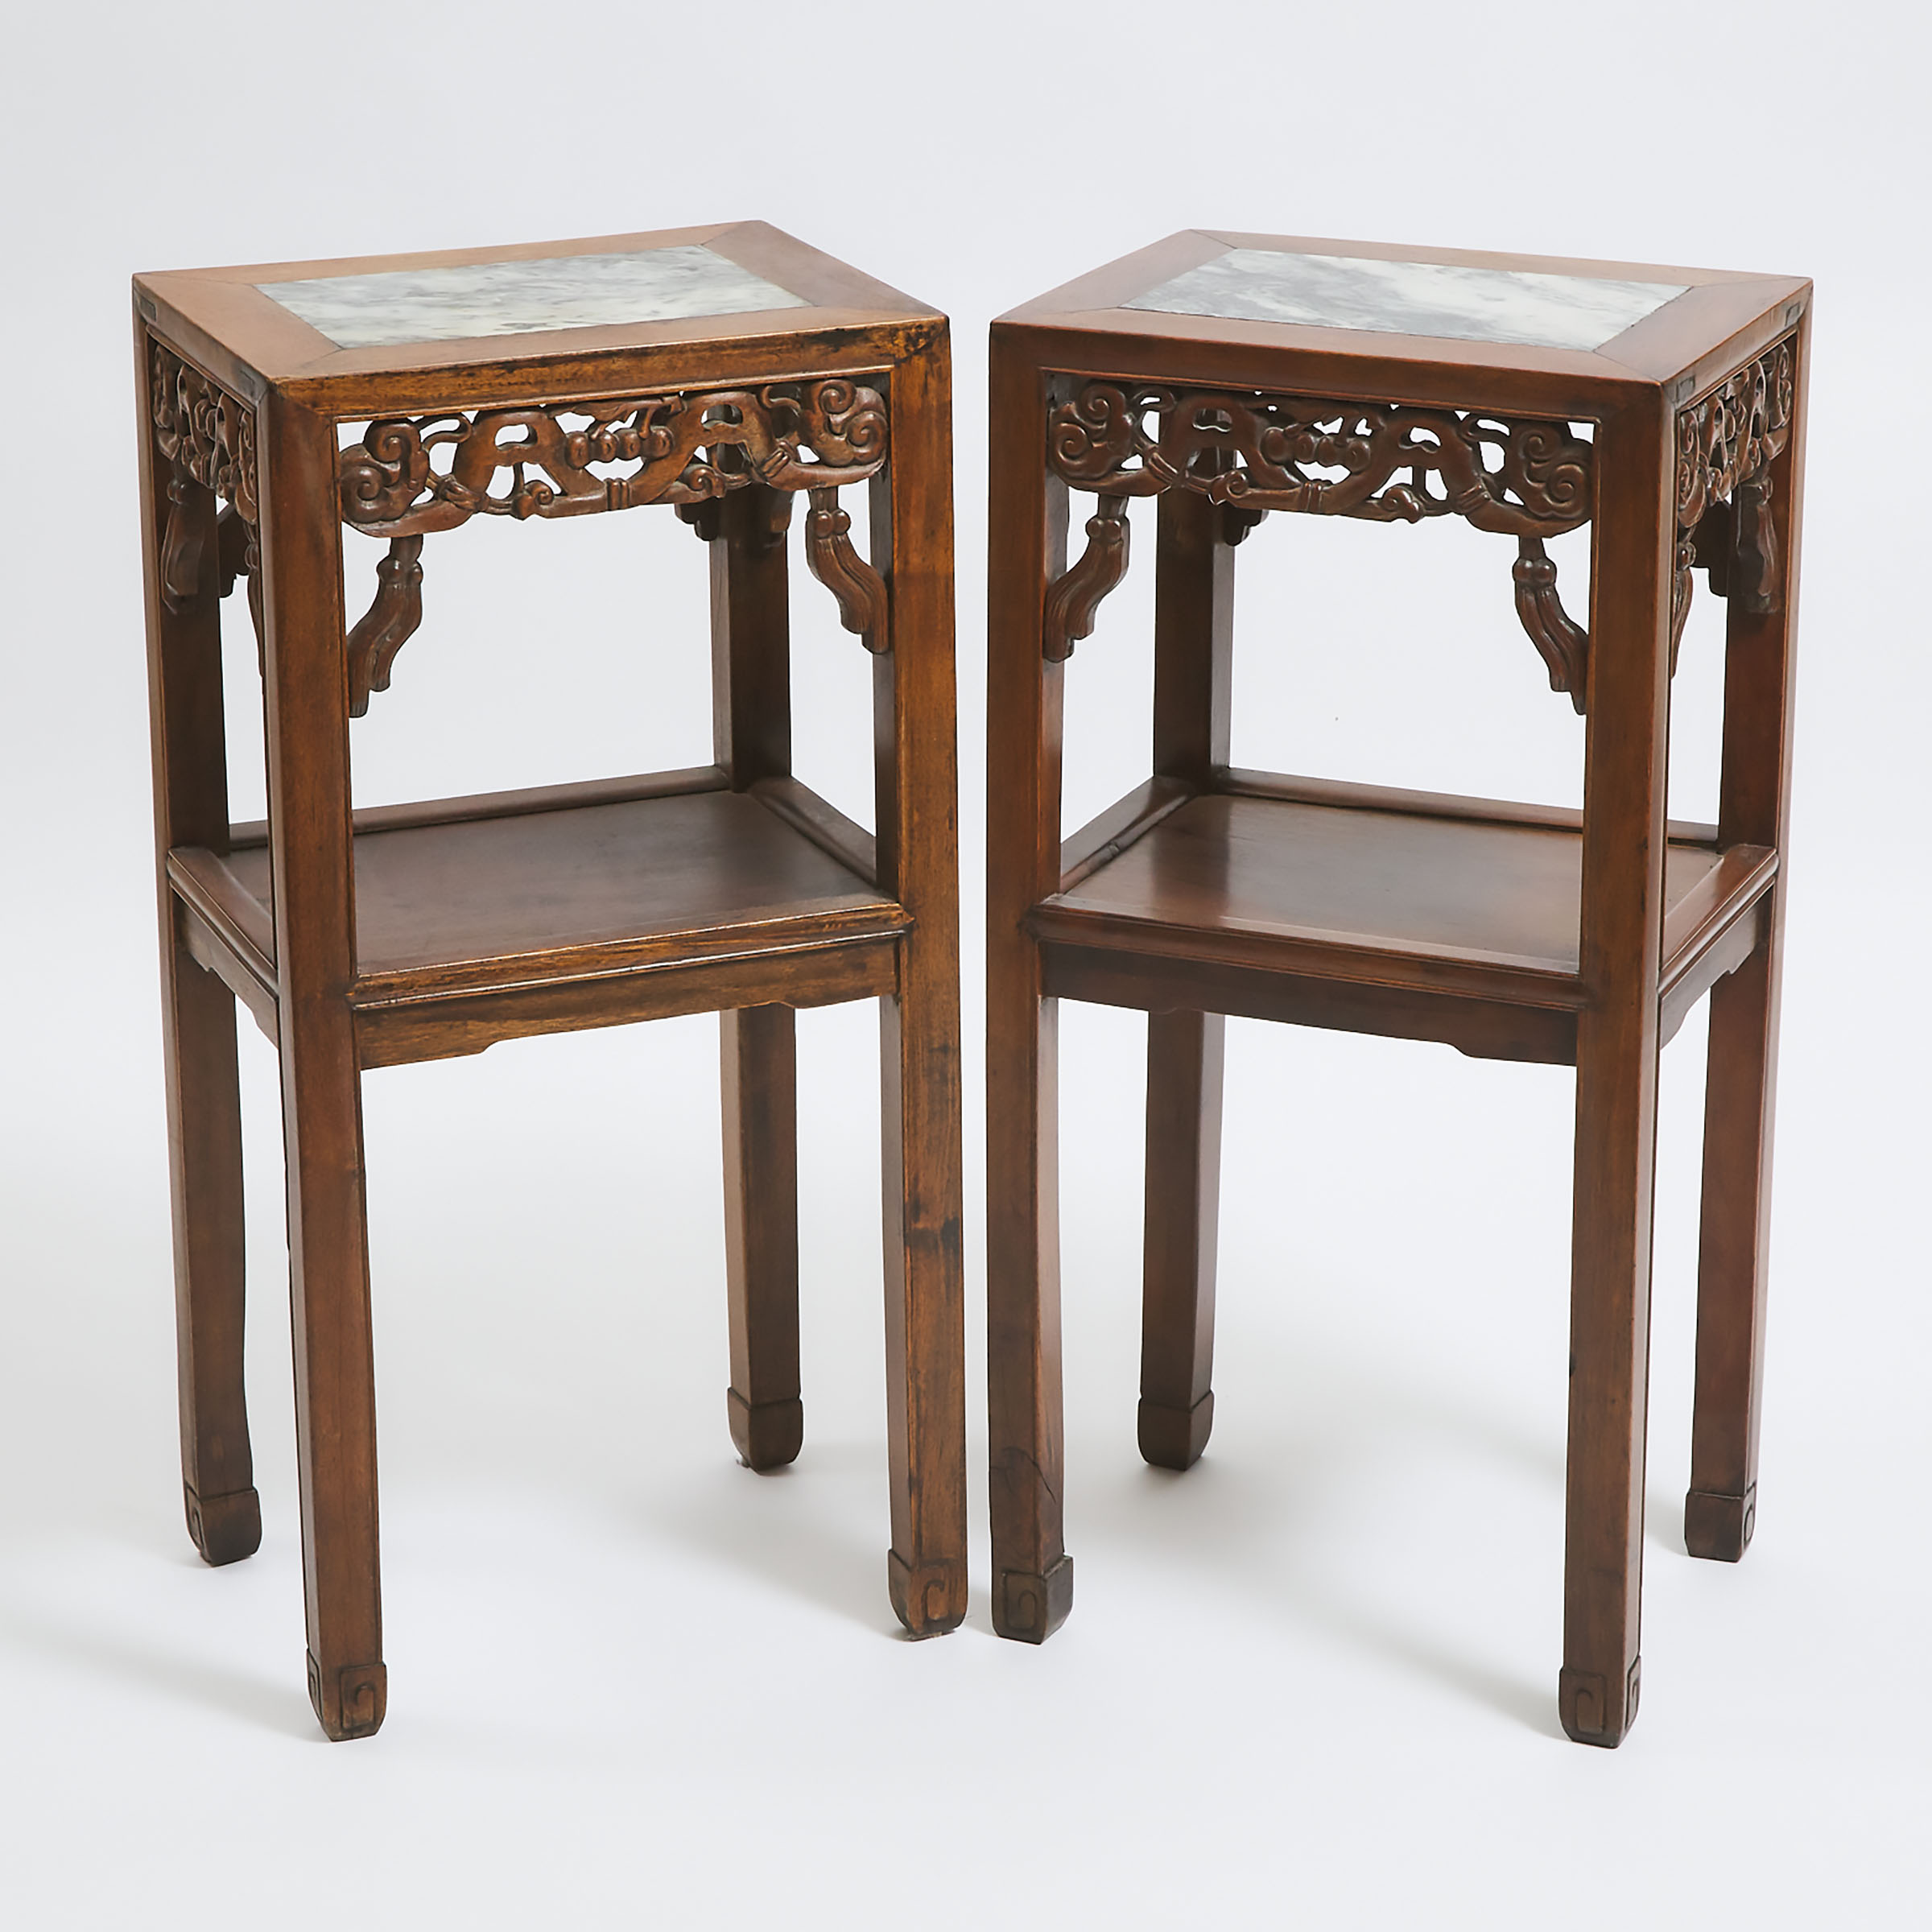 A Pair of Chinese Marble-Inset